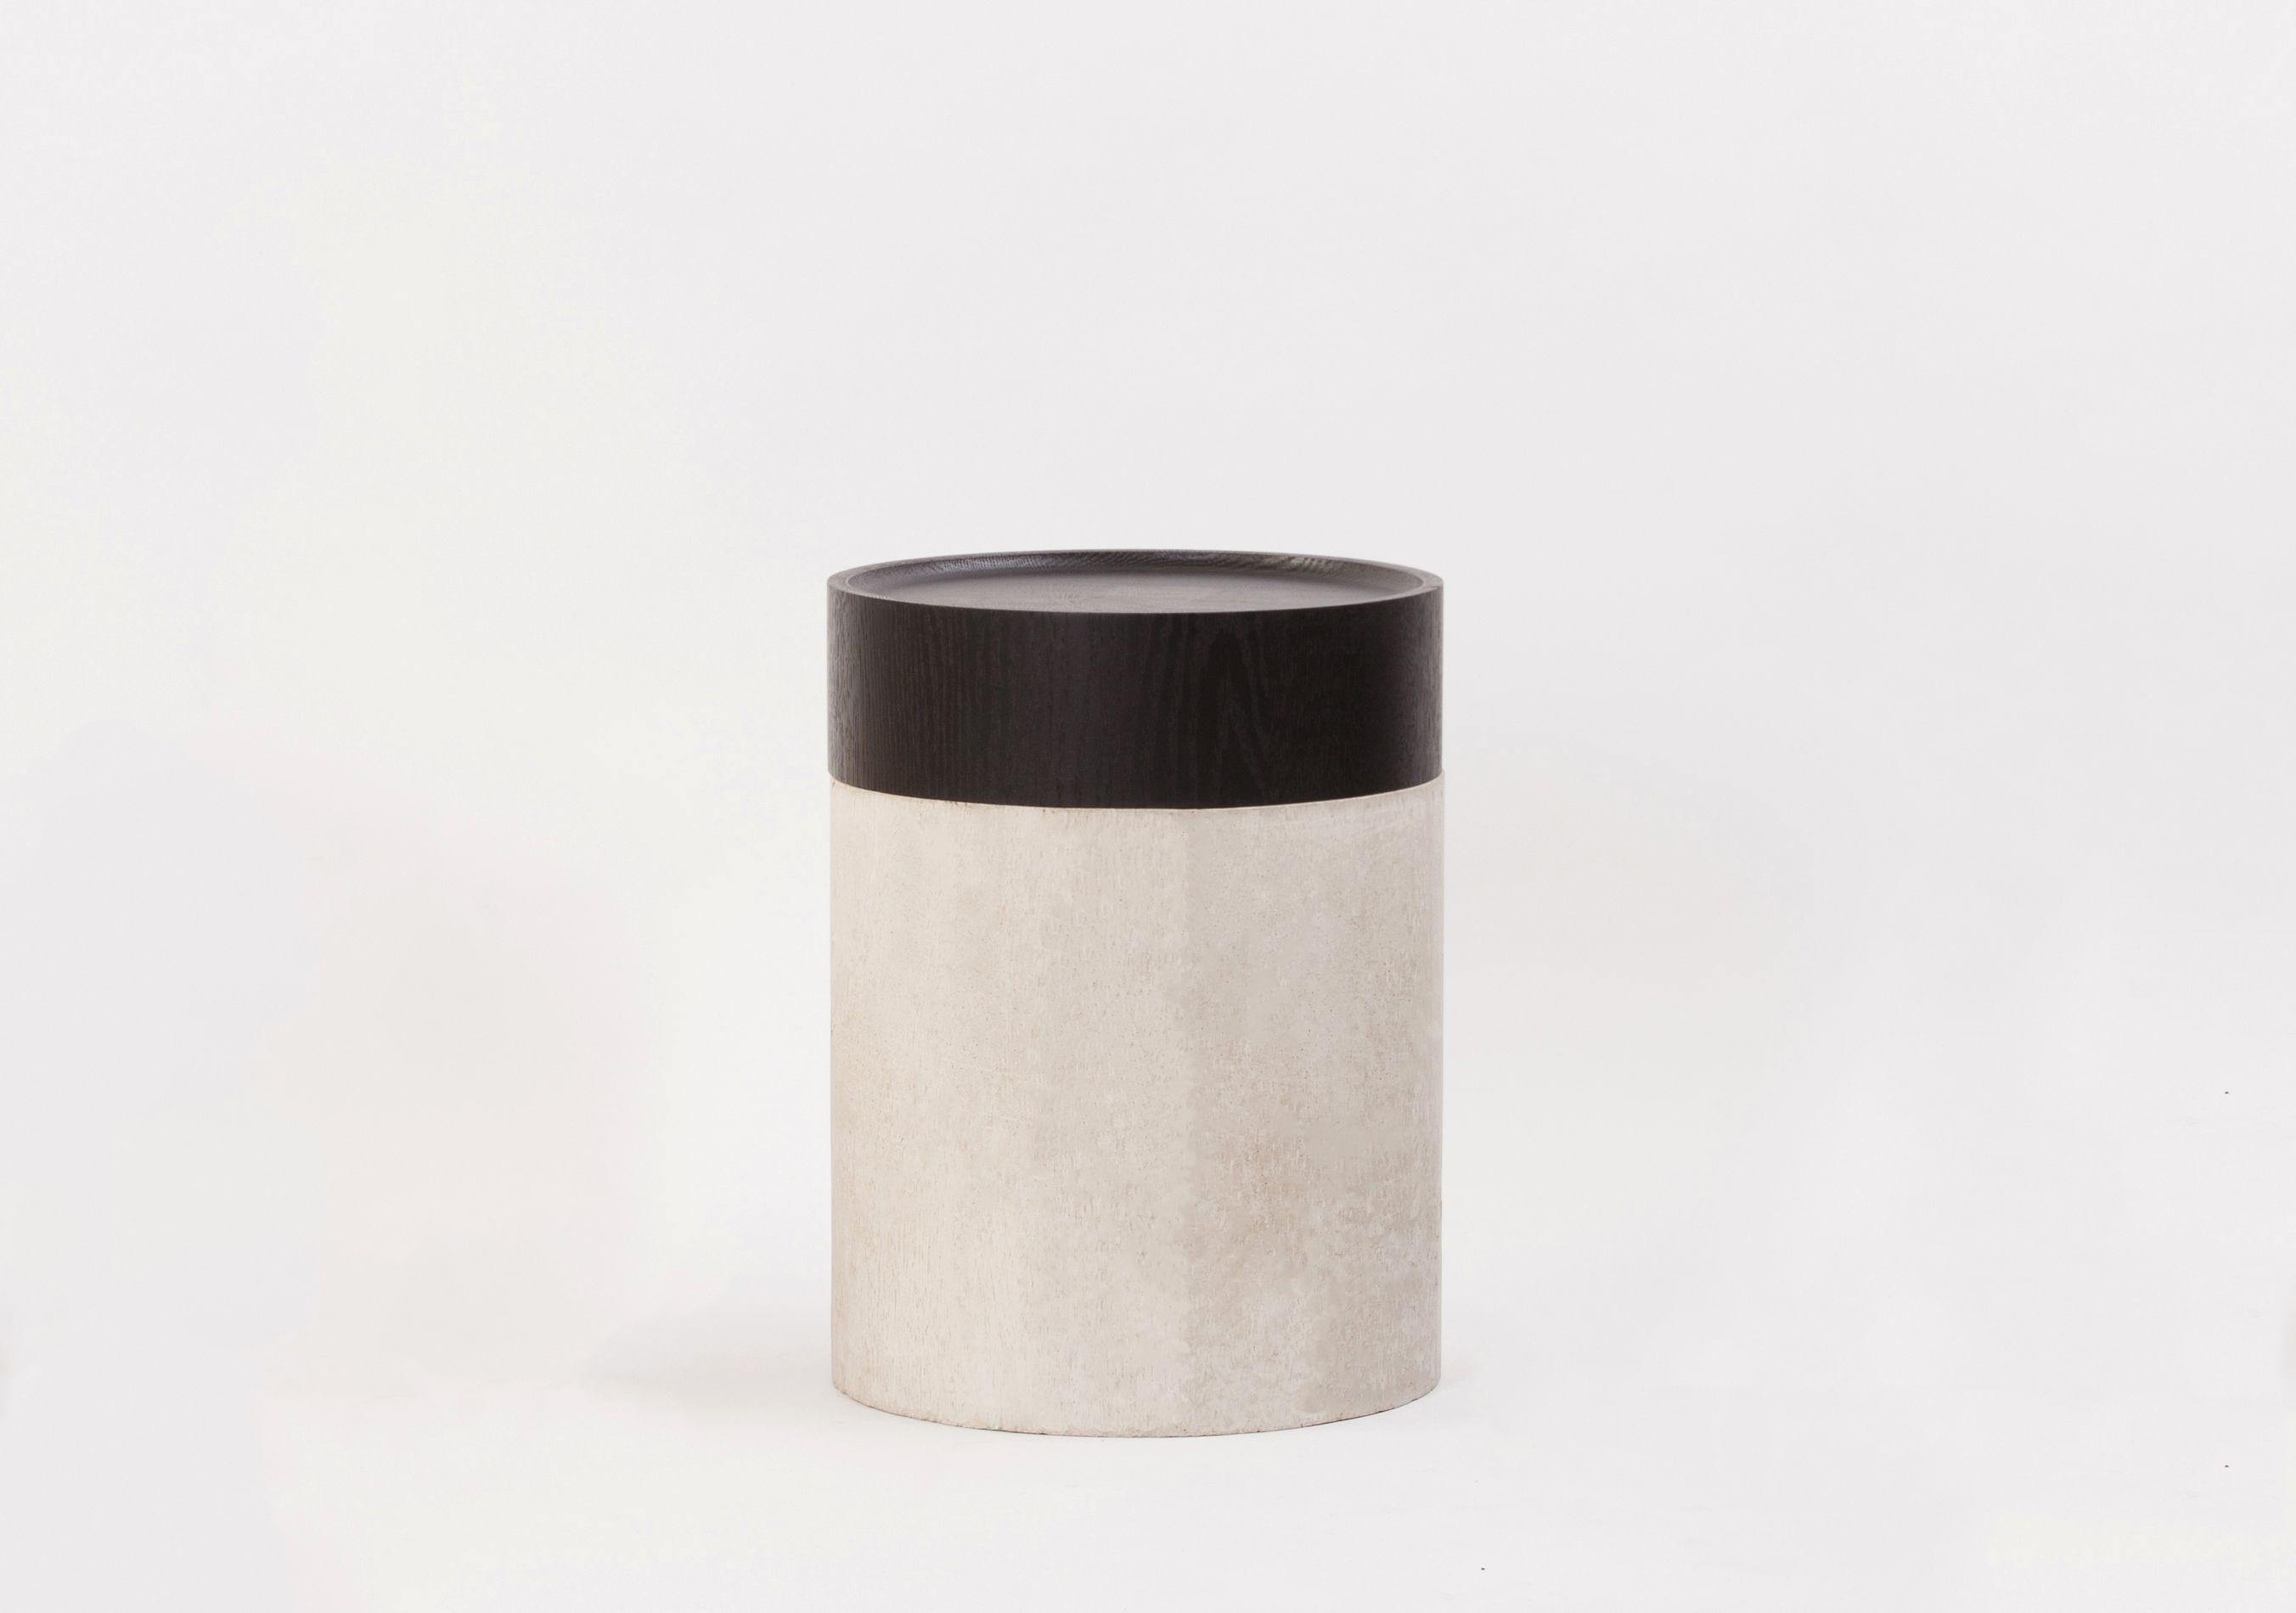 Totem side table by Estudio Persona
Dimensions: D 33 x H 43.2 cm
Materials: Solid ash, concrete base

Side table with concrete base and removable top in solid black stained ash.
Customizations available. 


Estudio Persona was created by